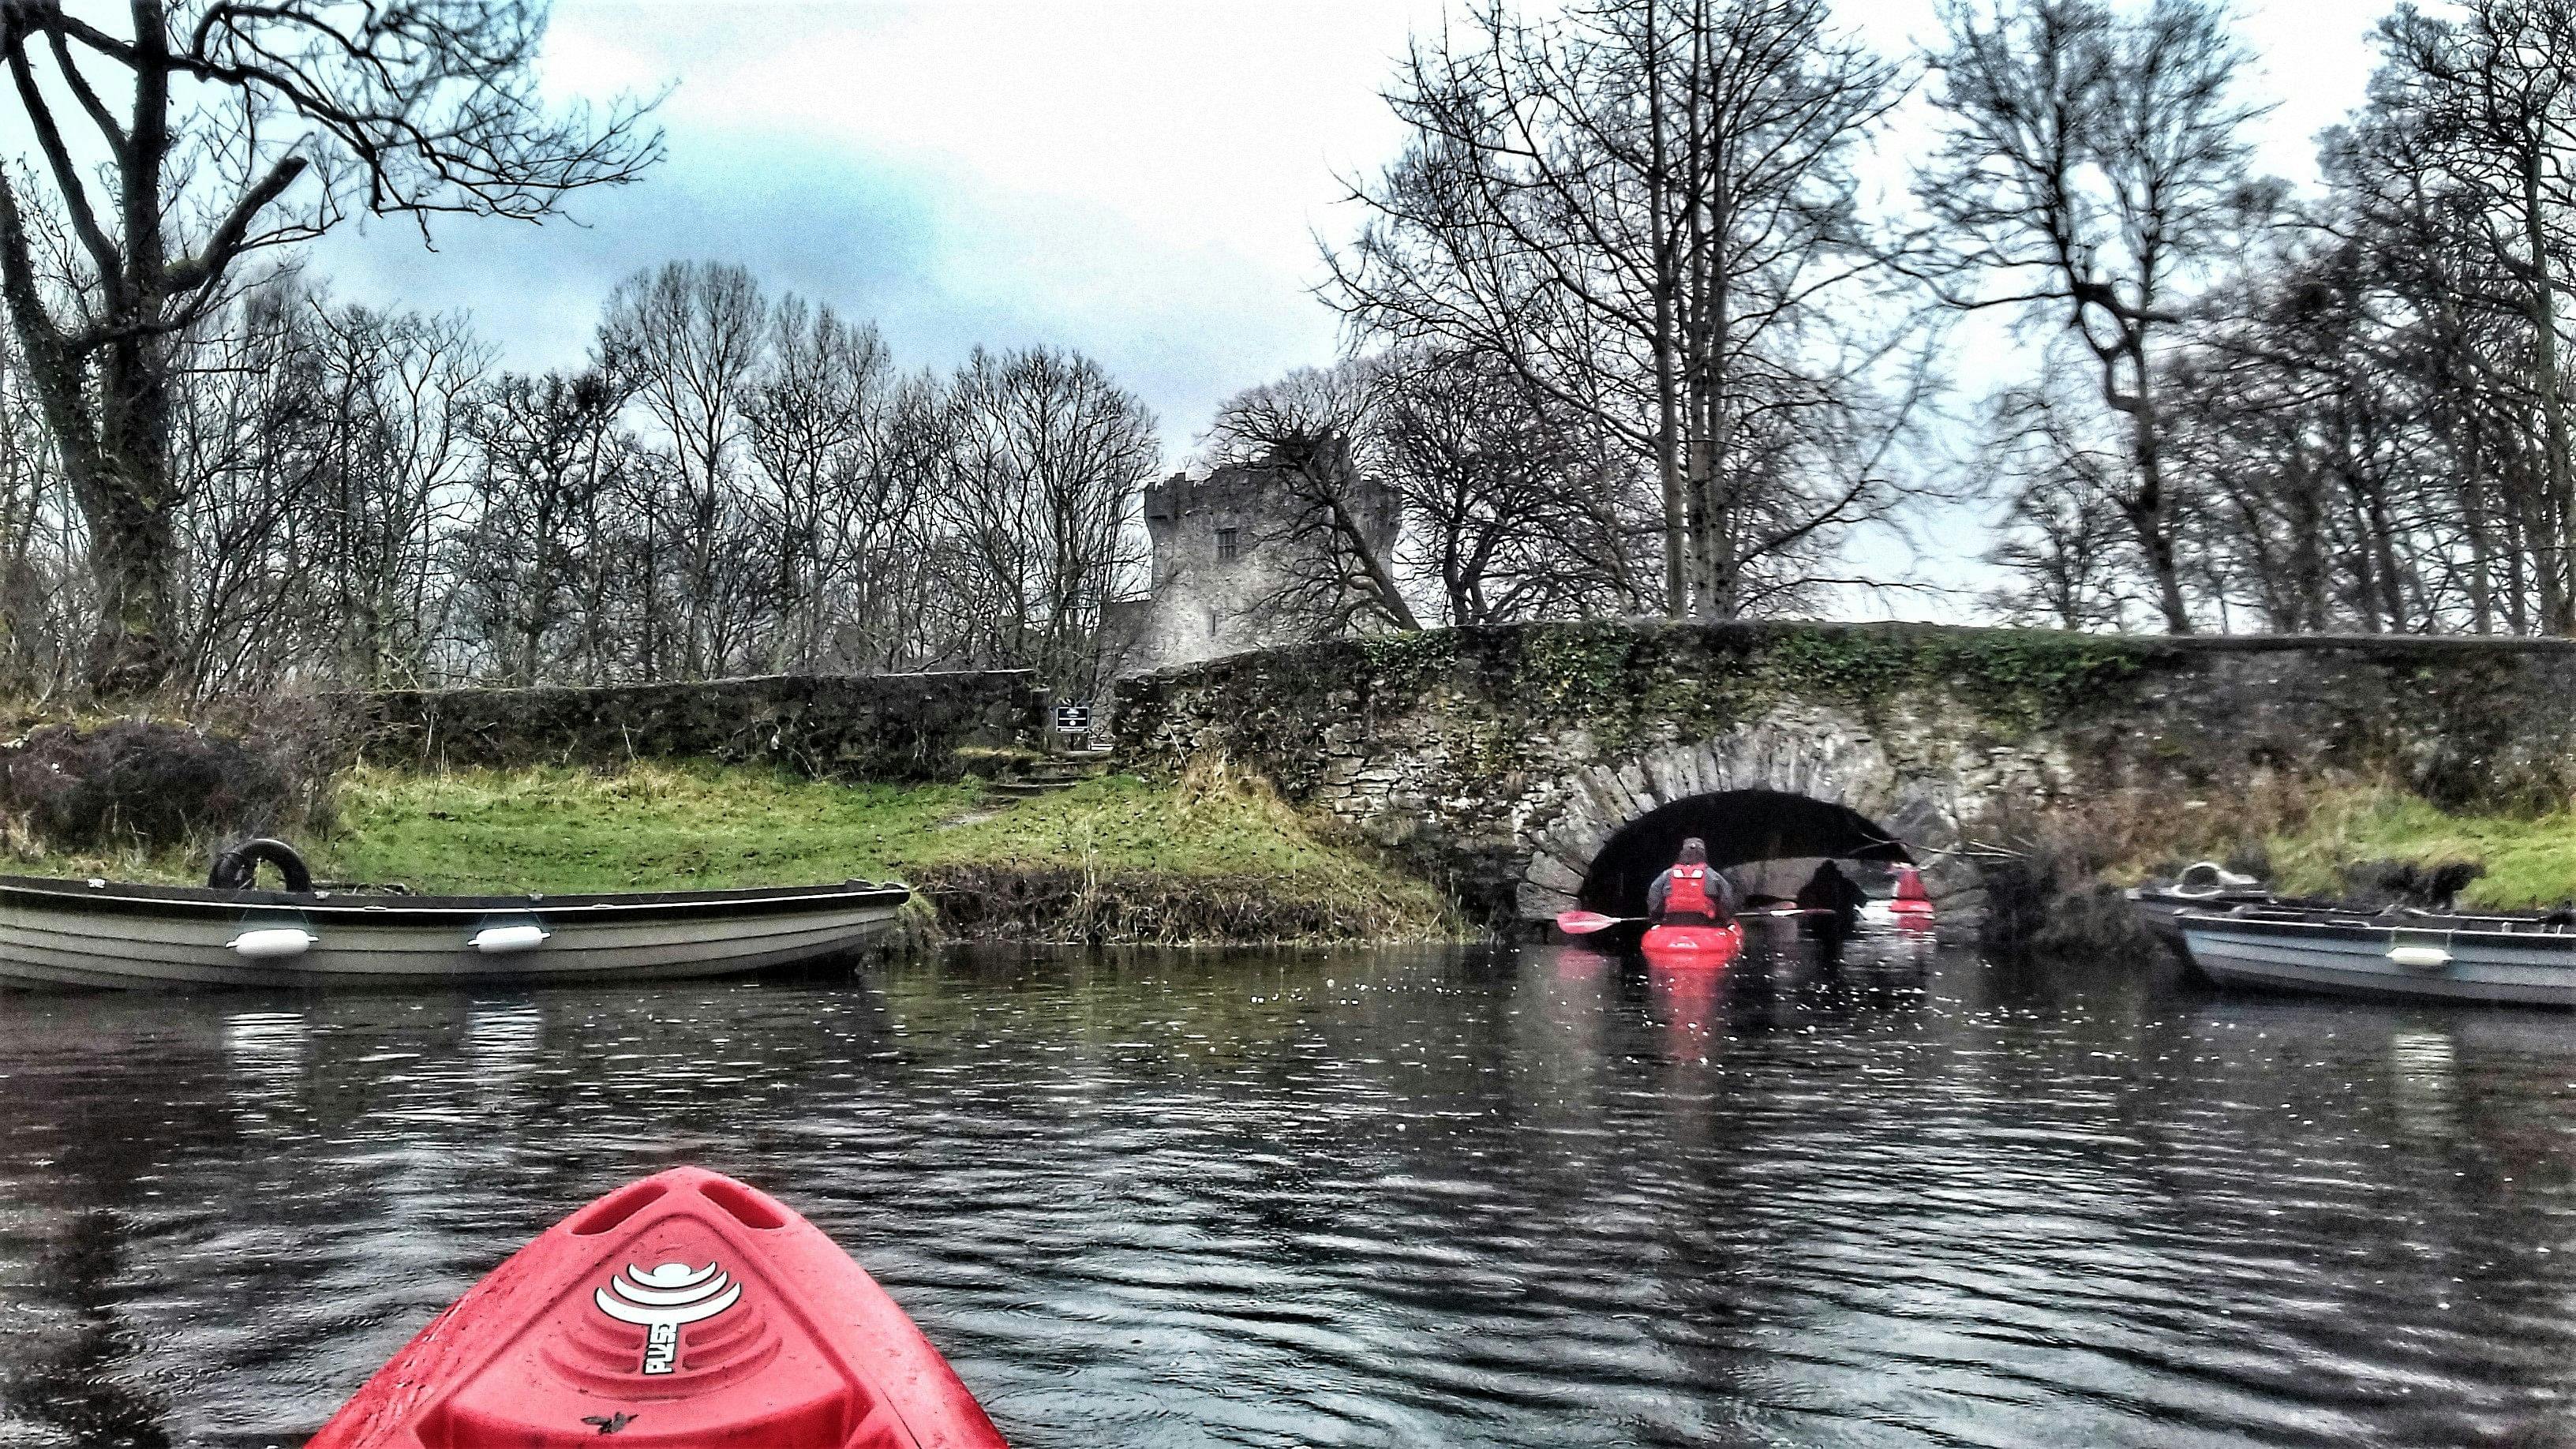 Killarney lakes kayaking experience from Ross Castle